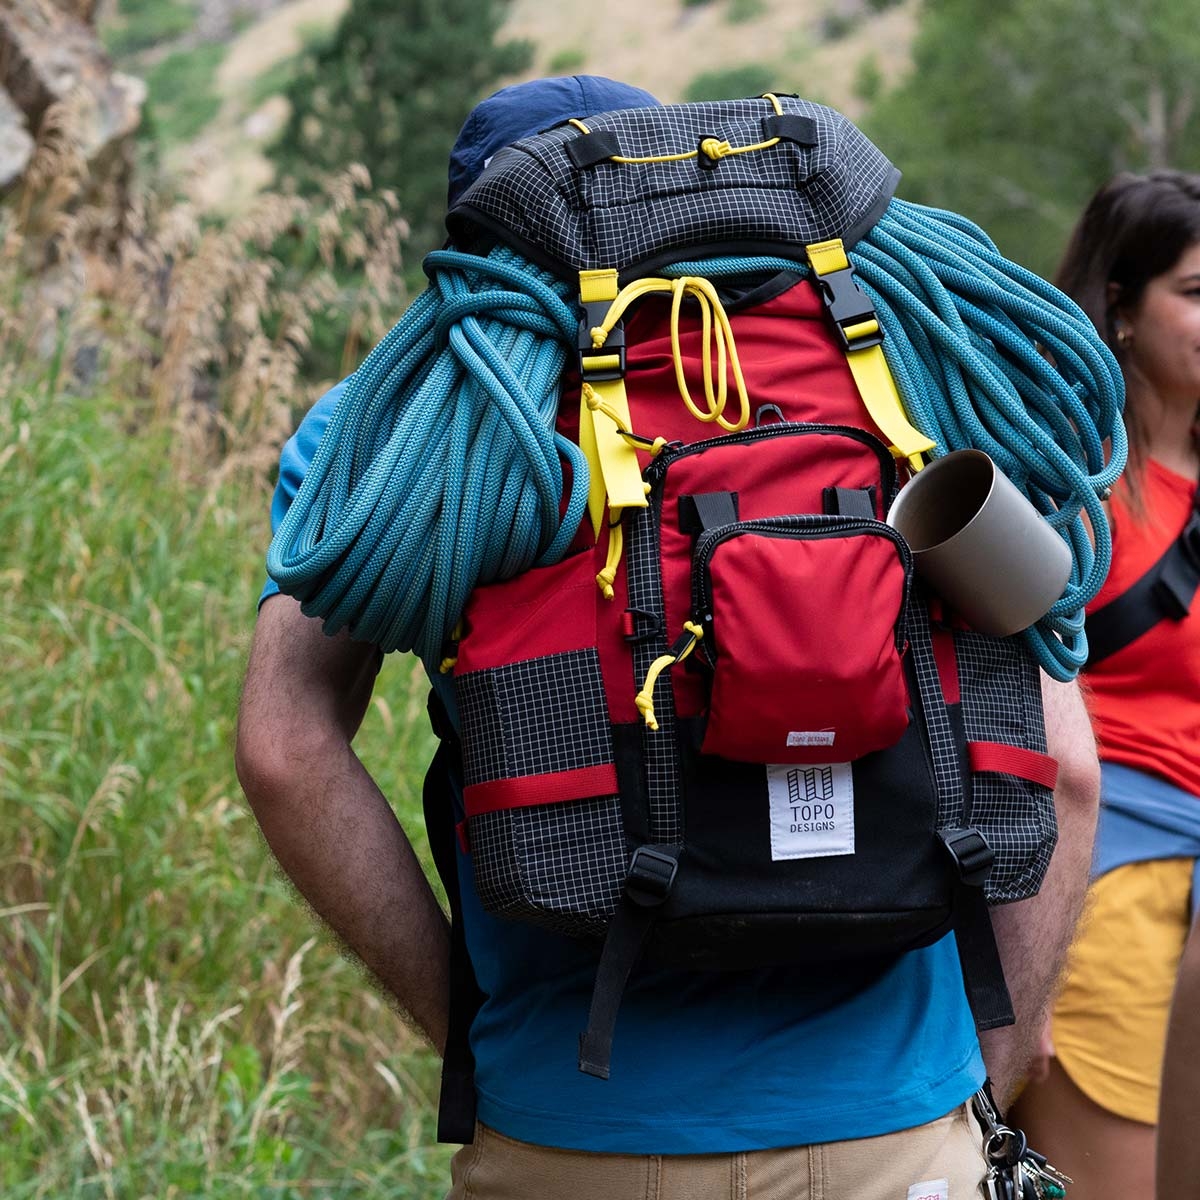 Topo Designs Topo Designs Subalpine Pack, combines the functionality of classic hiking packs with unmistakably Topo Designs styling